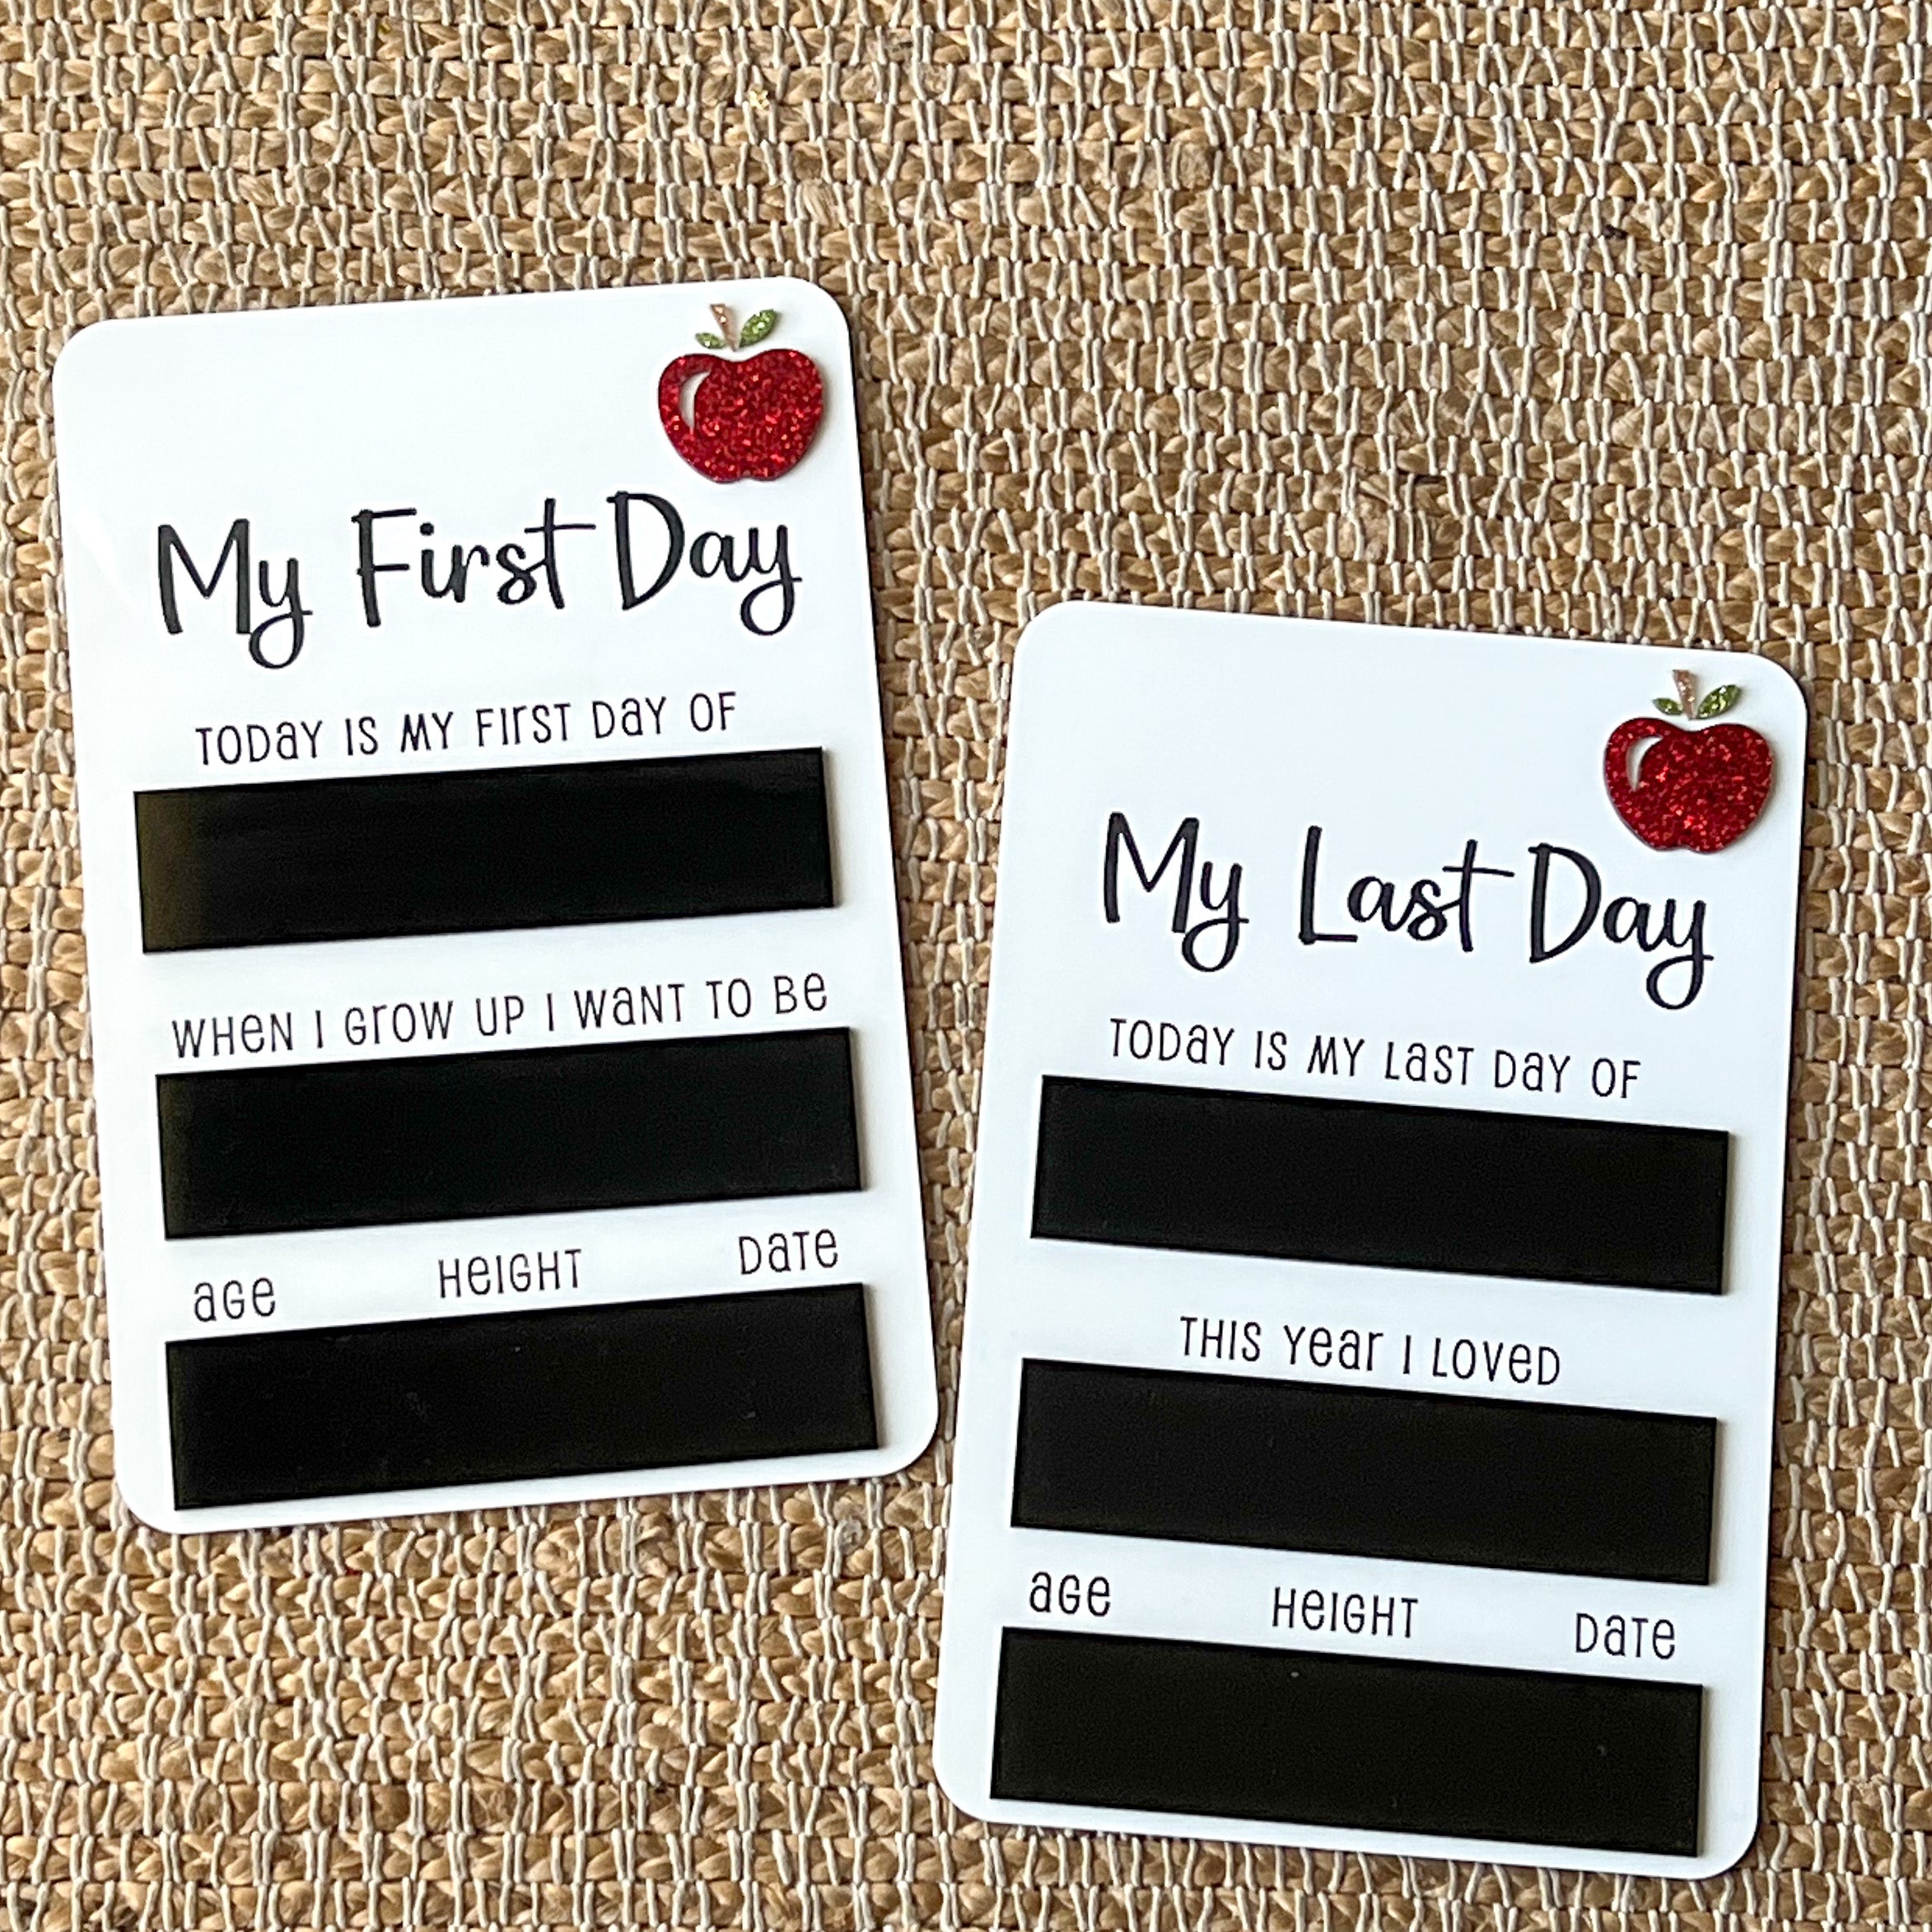 “My First Day” board